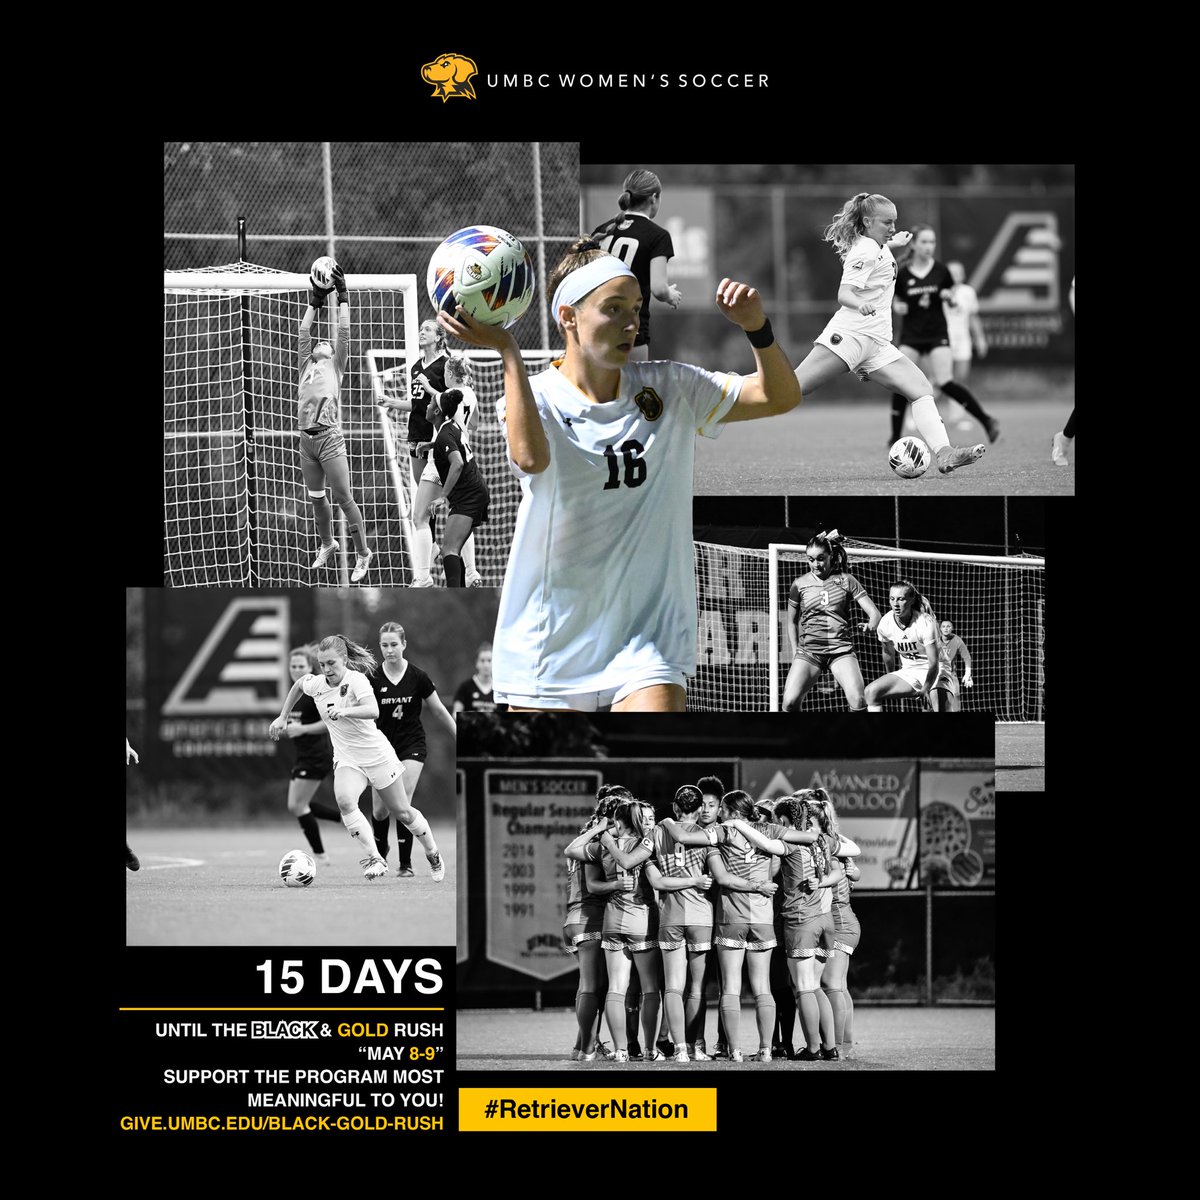 Black & Gold Rush Giving Day is May 8 & 9! Please consider giving a gift to our Women’s Soccer Program. No gift is too big or too small. All gifts are greatly appreciated. Link is in the bio. Thanks in advance! Go Dawgs!